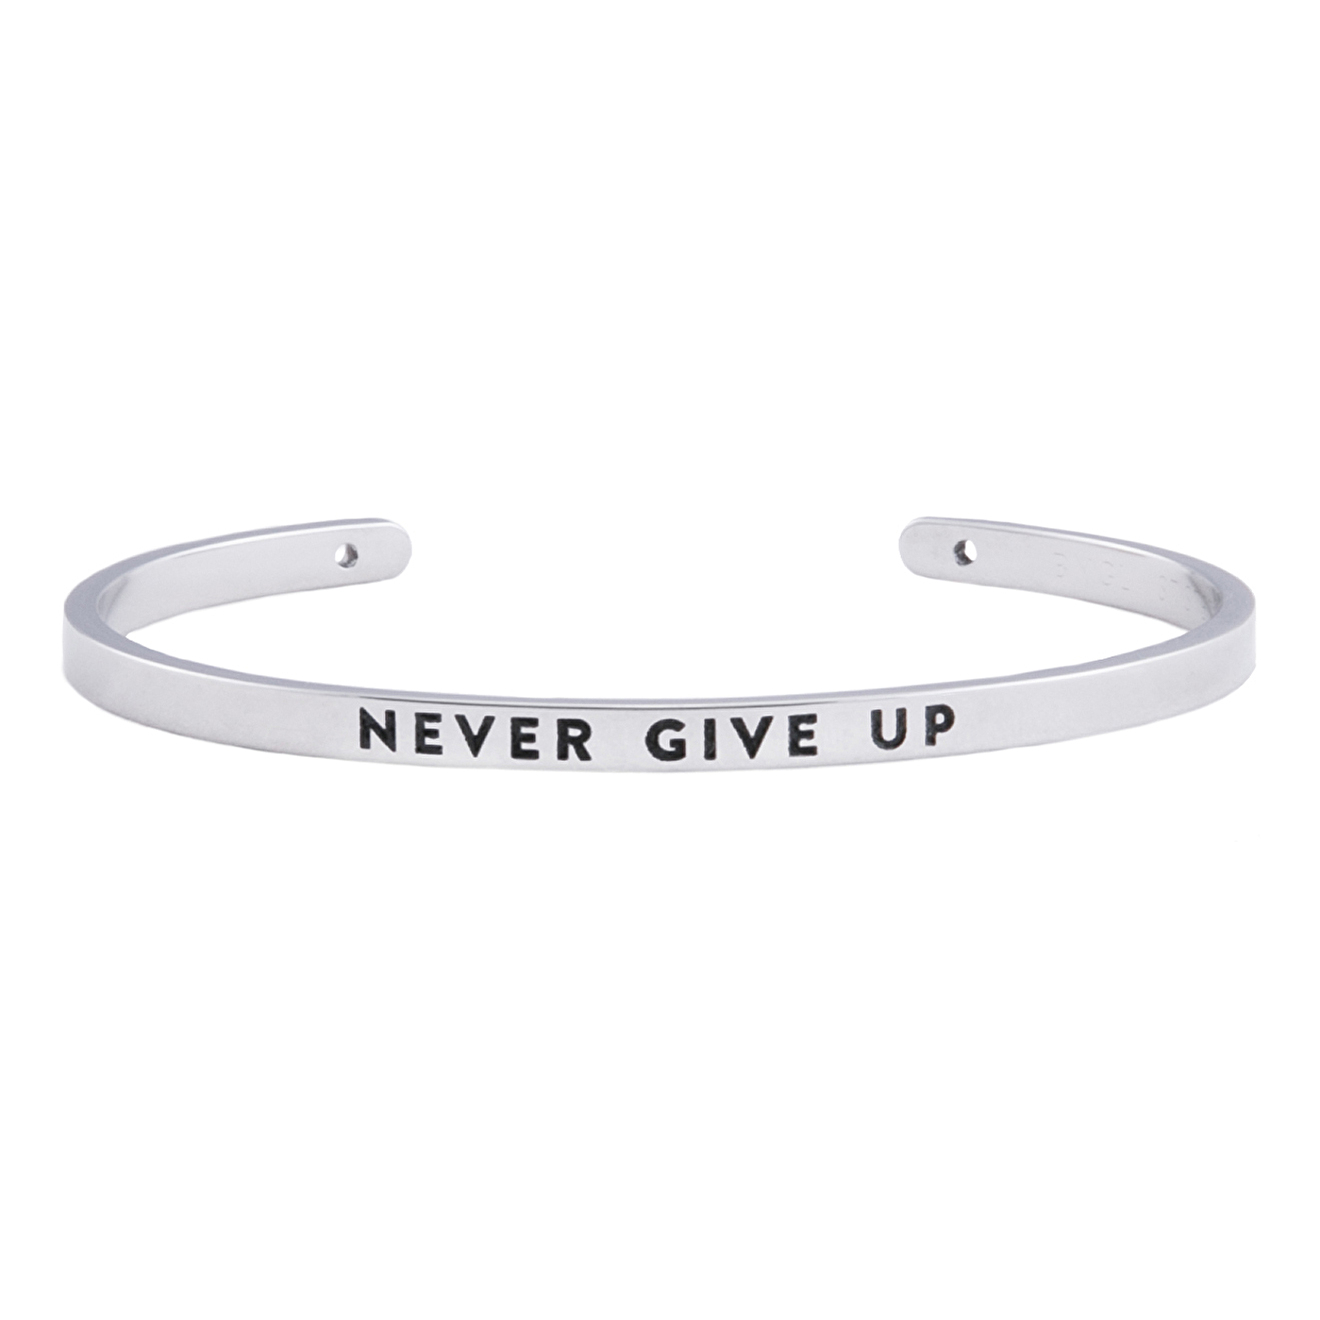 BNGL браслет NEVER GIVE UP браслет bngl never give up m мл